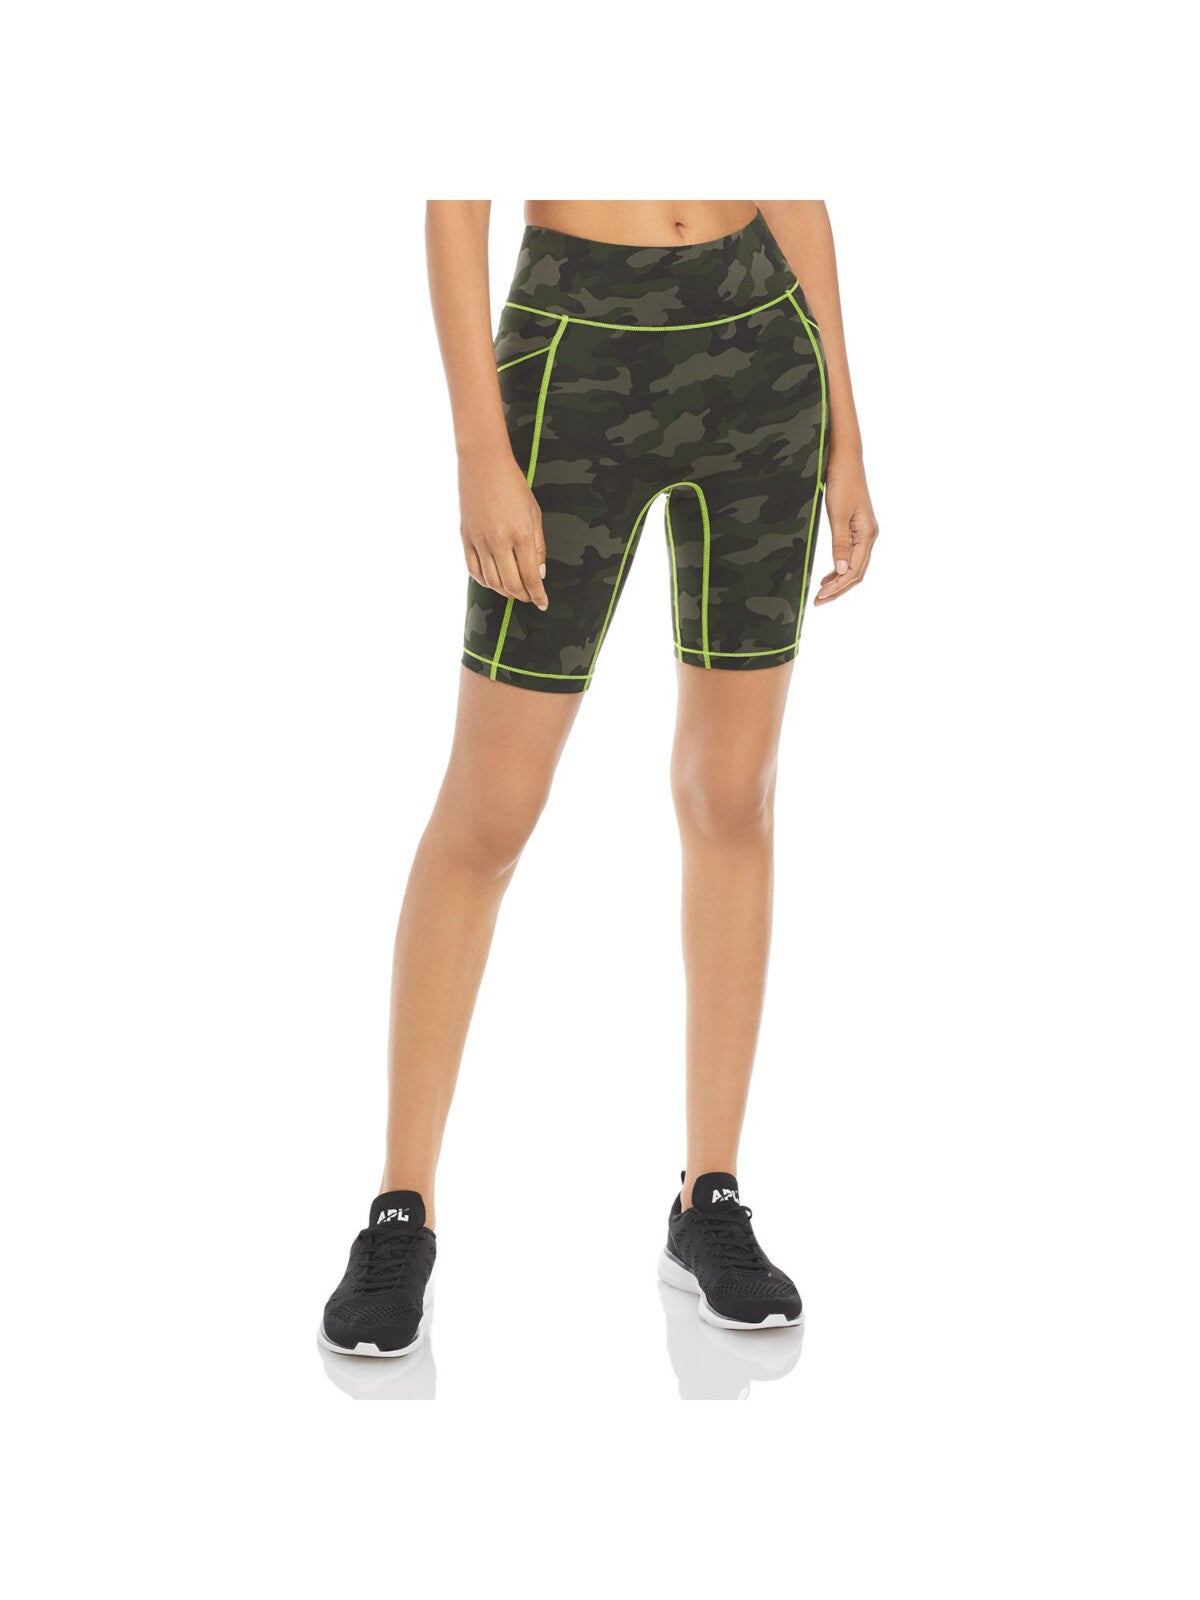 ALL ACCESS Womens Green Stretch Fitted Pocketed Extra Wide Waistband Camouflage Active Wear High Waist Shorts XS